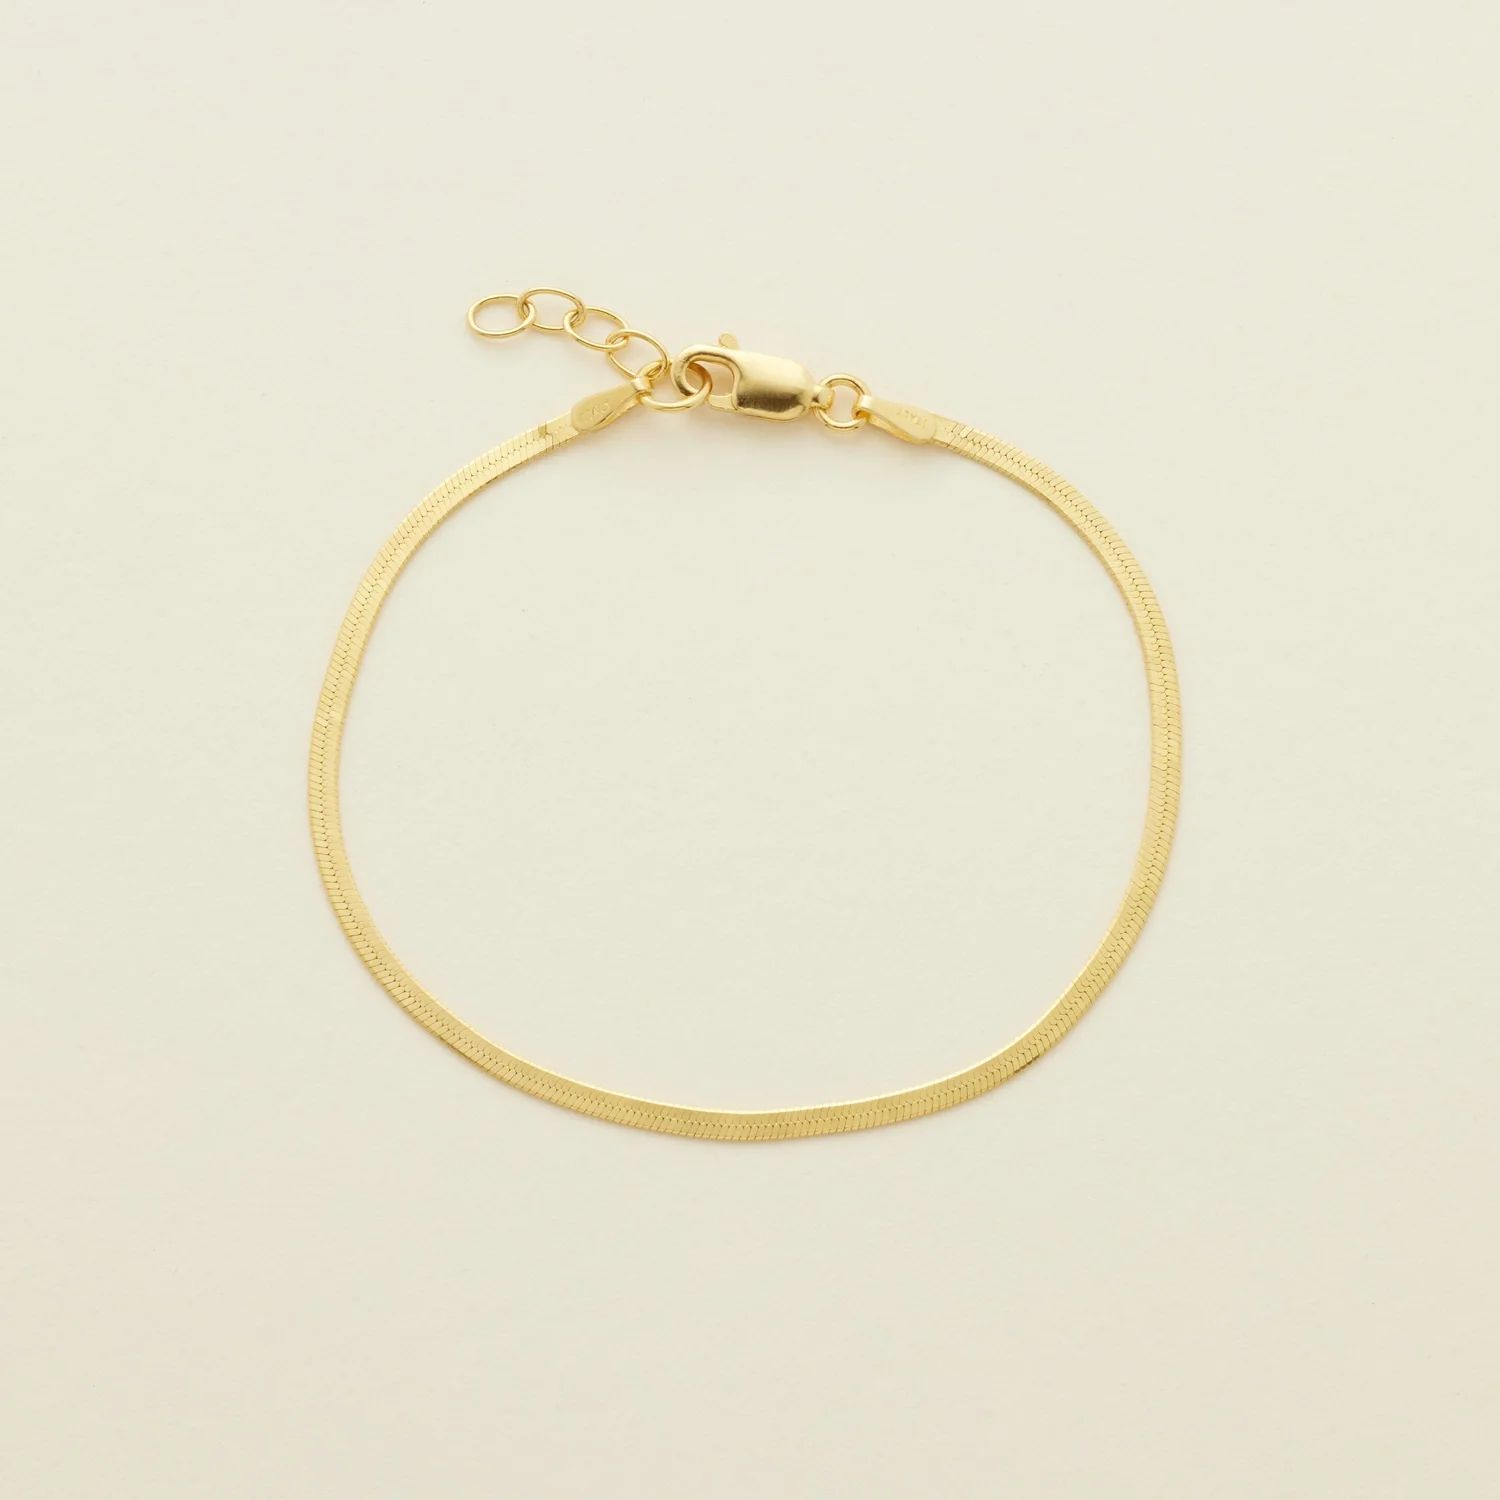 Hera Chain Bracelet - 1.9mm & 3mm | Made by Mary (US)